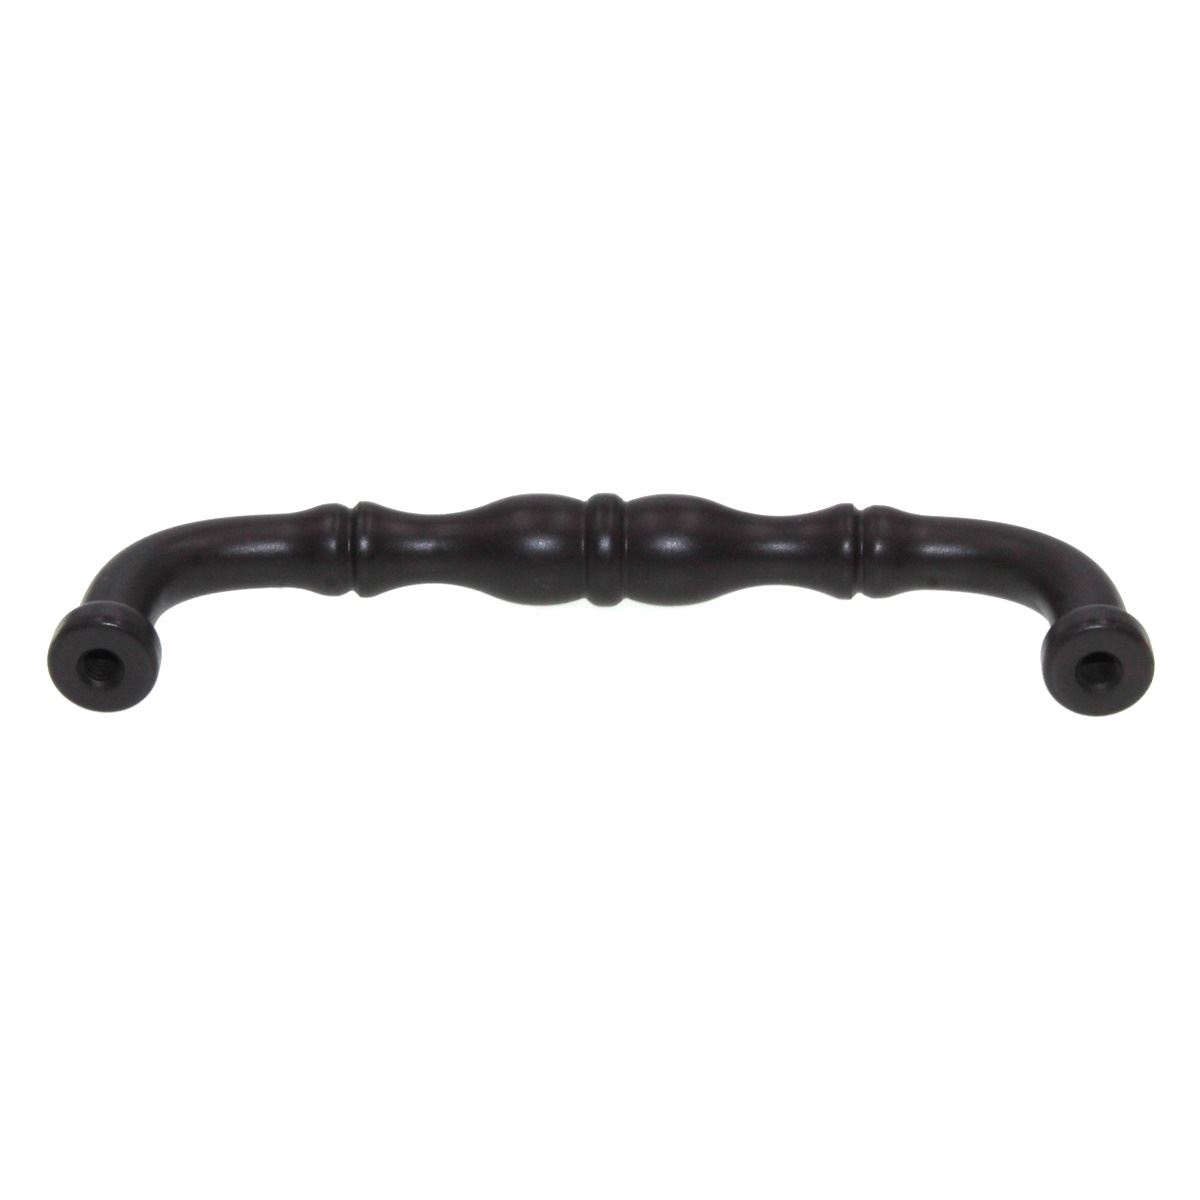 Schaub And Company Colonial Cabinet Arch Pull 4" Ctr Oil-Rubbed Bronze 747-10B